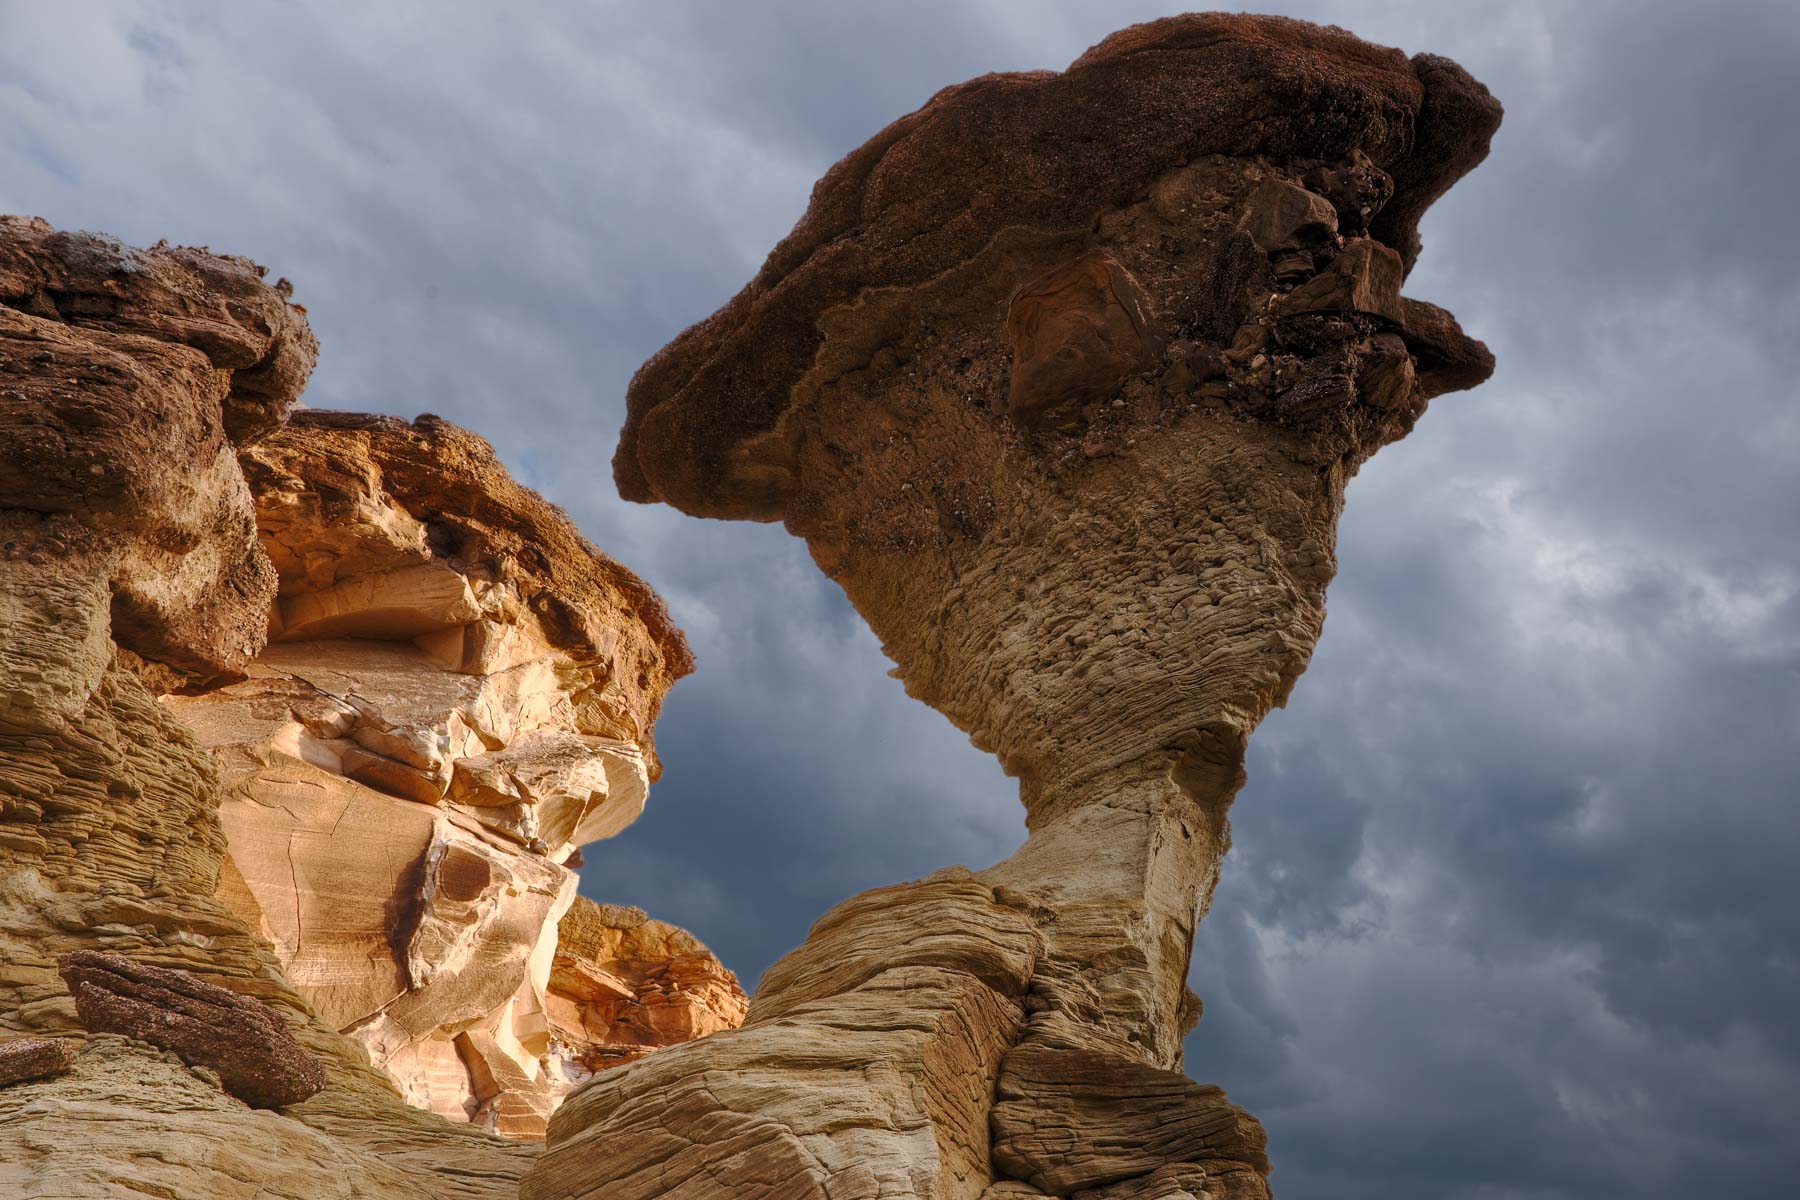 Storm Clouds over Twisted Hoodoo in The Upper White Rocks